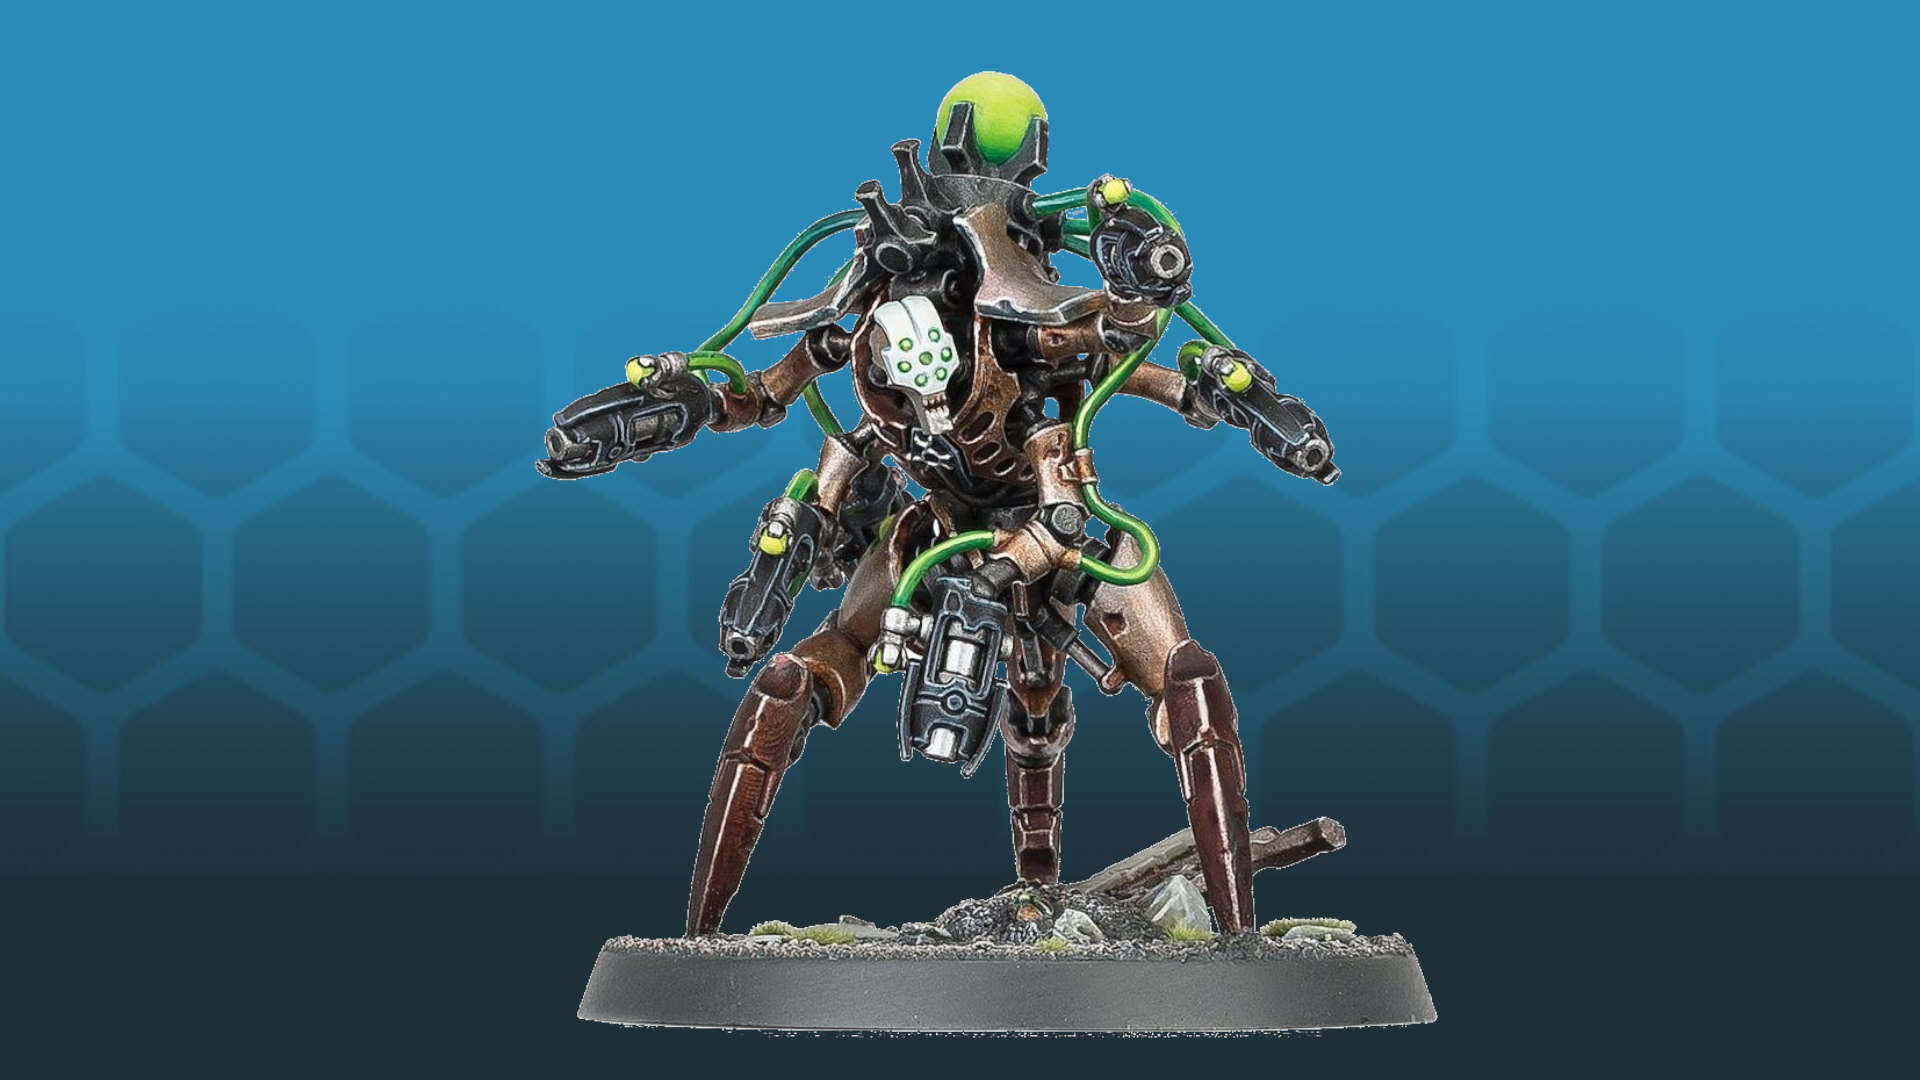 Warhammer 40k Necron Hexmark Destroyer, a tri-limbed android with six arms, each equipped with a ray gun